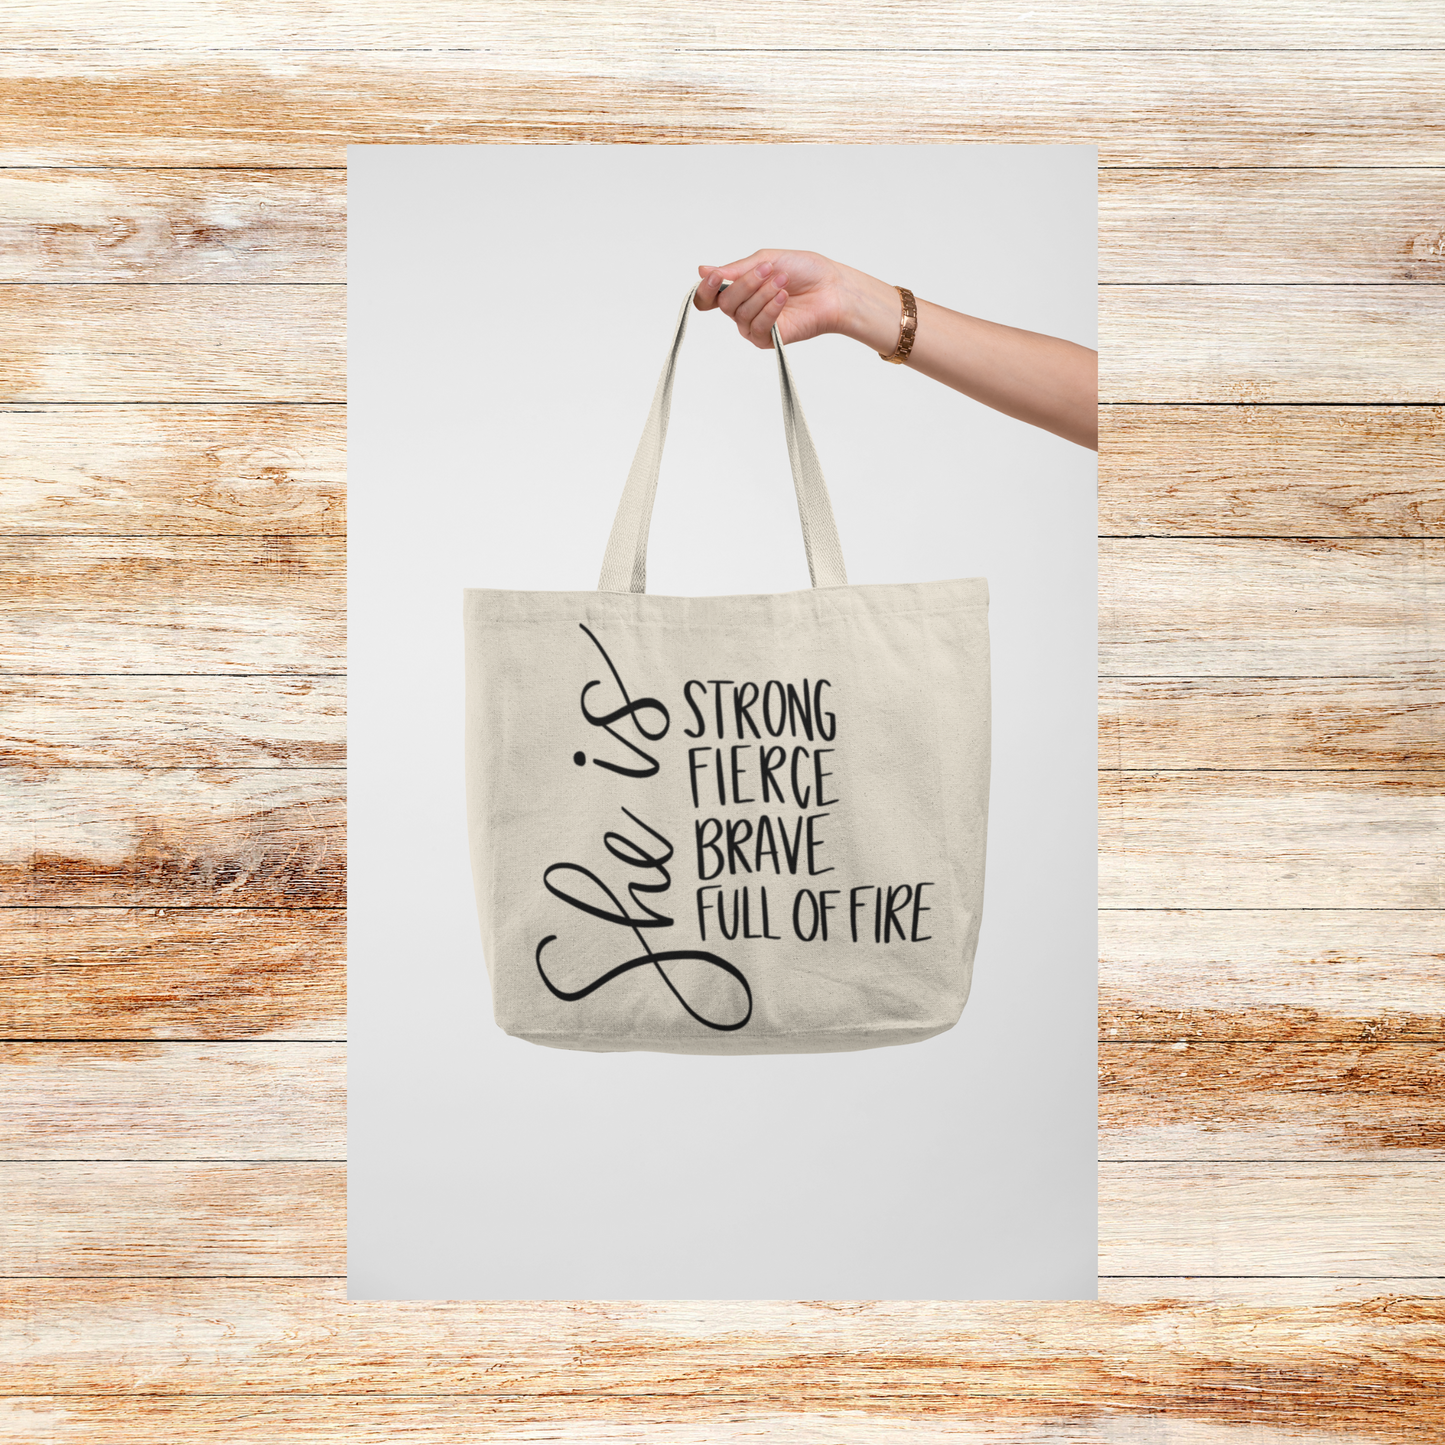 She is Strong, Fierce, Brave, Full of Fire Tote Bag